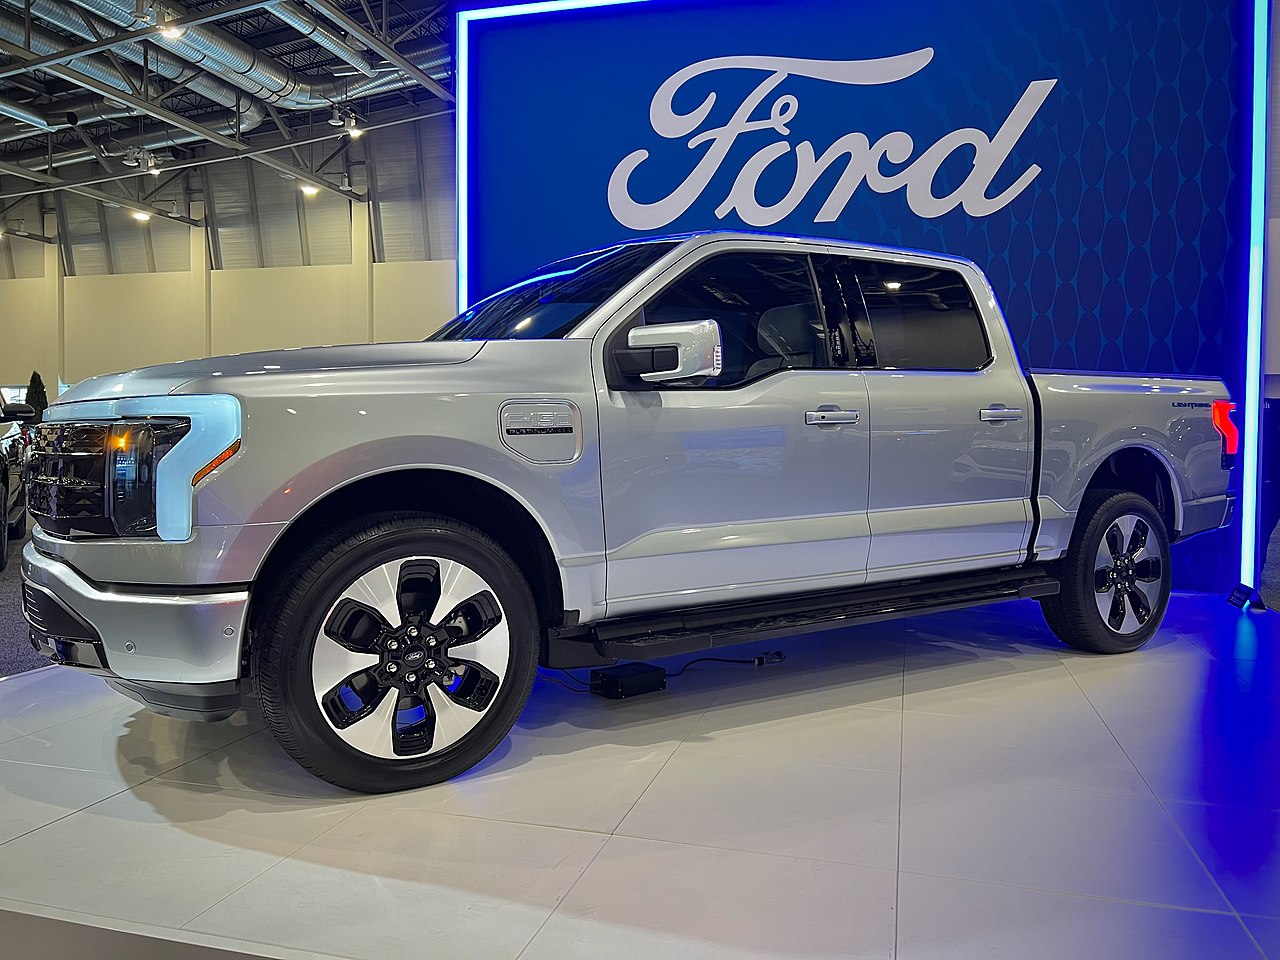 SpaceX Chooses Ford F-150 Lightning Over Tesla's Cybertruck for Rocket Launch Tasks: A Surprising Turn in Space Tech